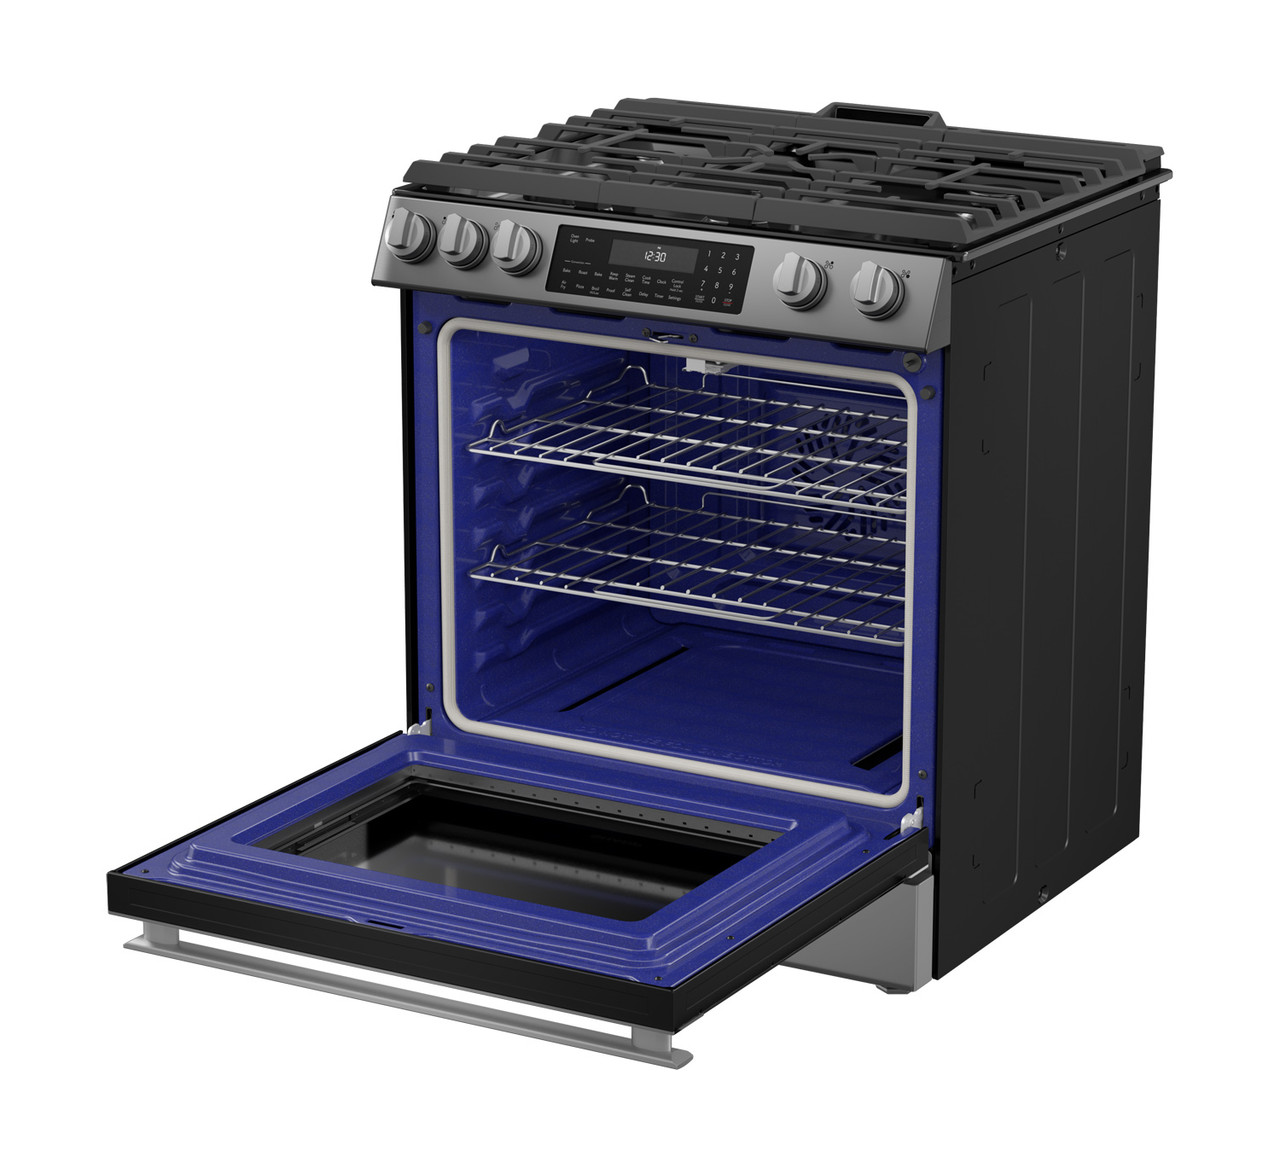 30 in. Gas Convection Slide-In Range with Air Fry (SSG3061JS) left angle open